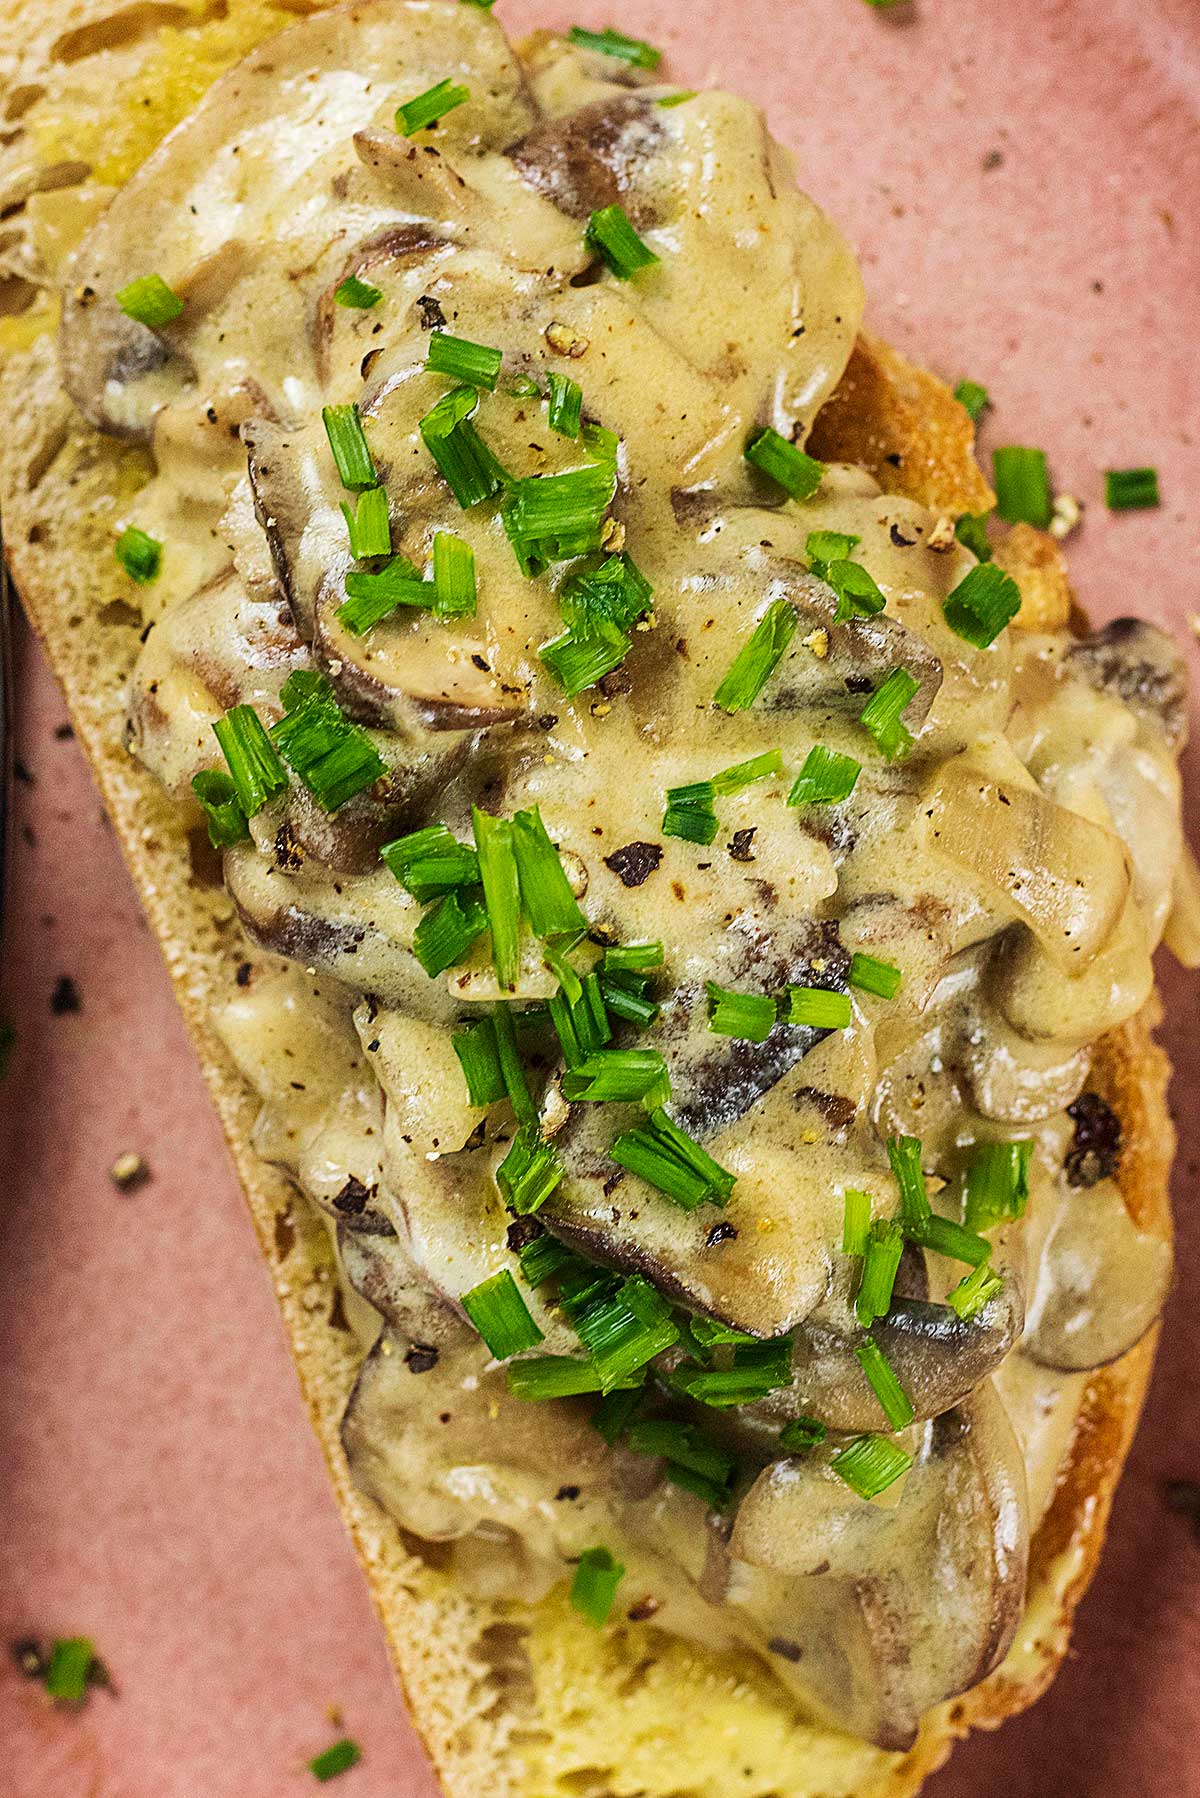 Chopped chives on top od mushrooms in a creamy sauce.